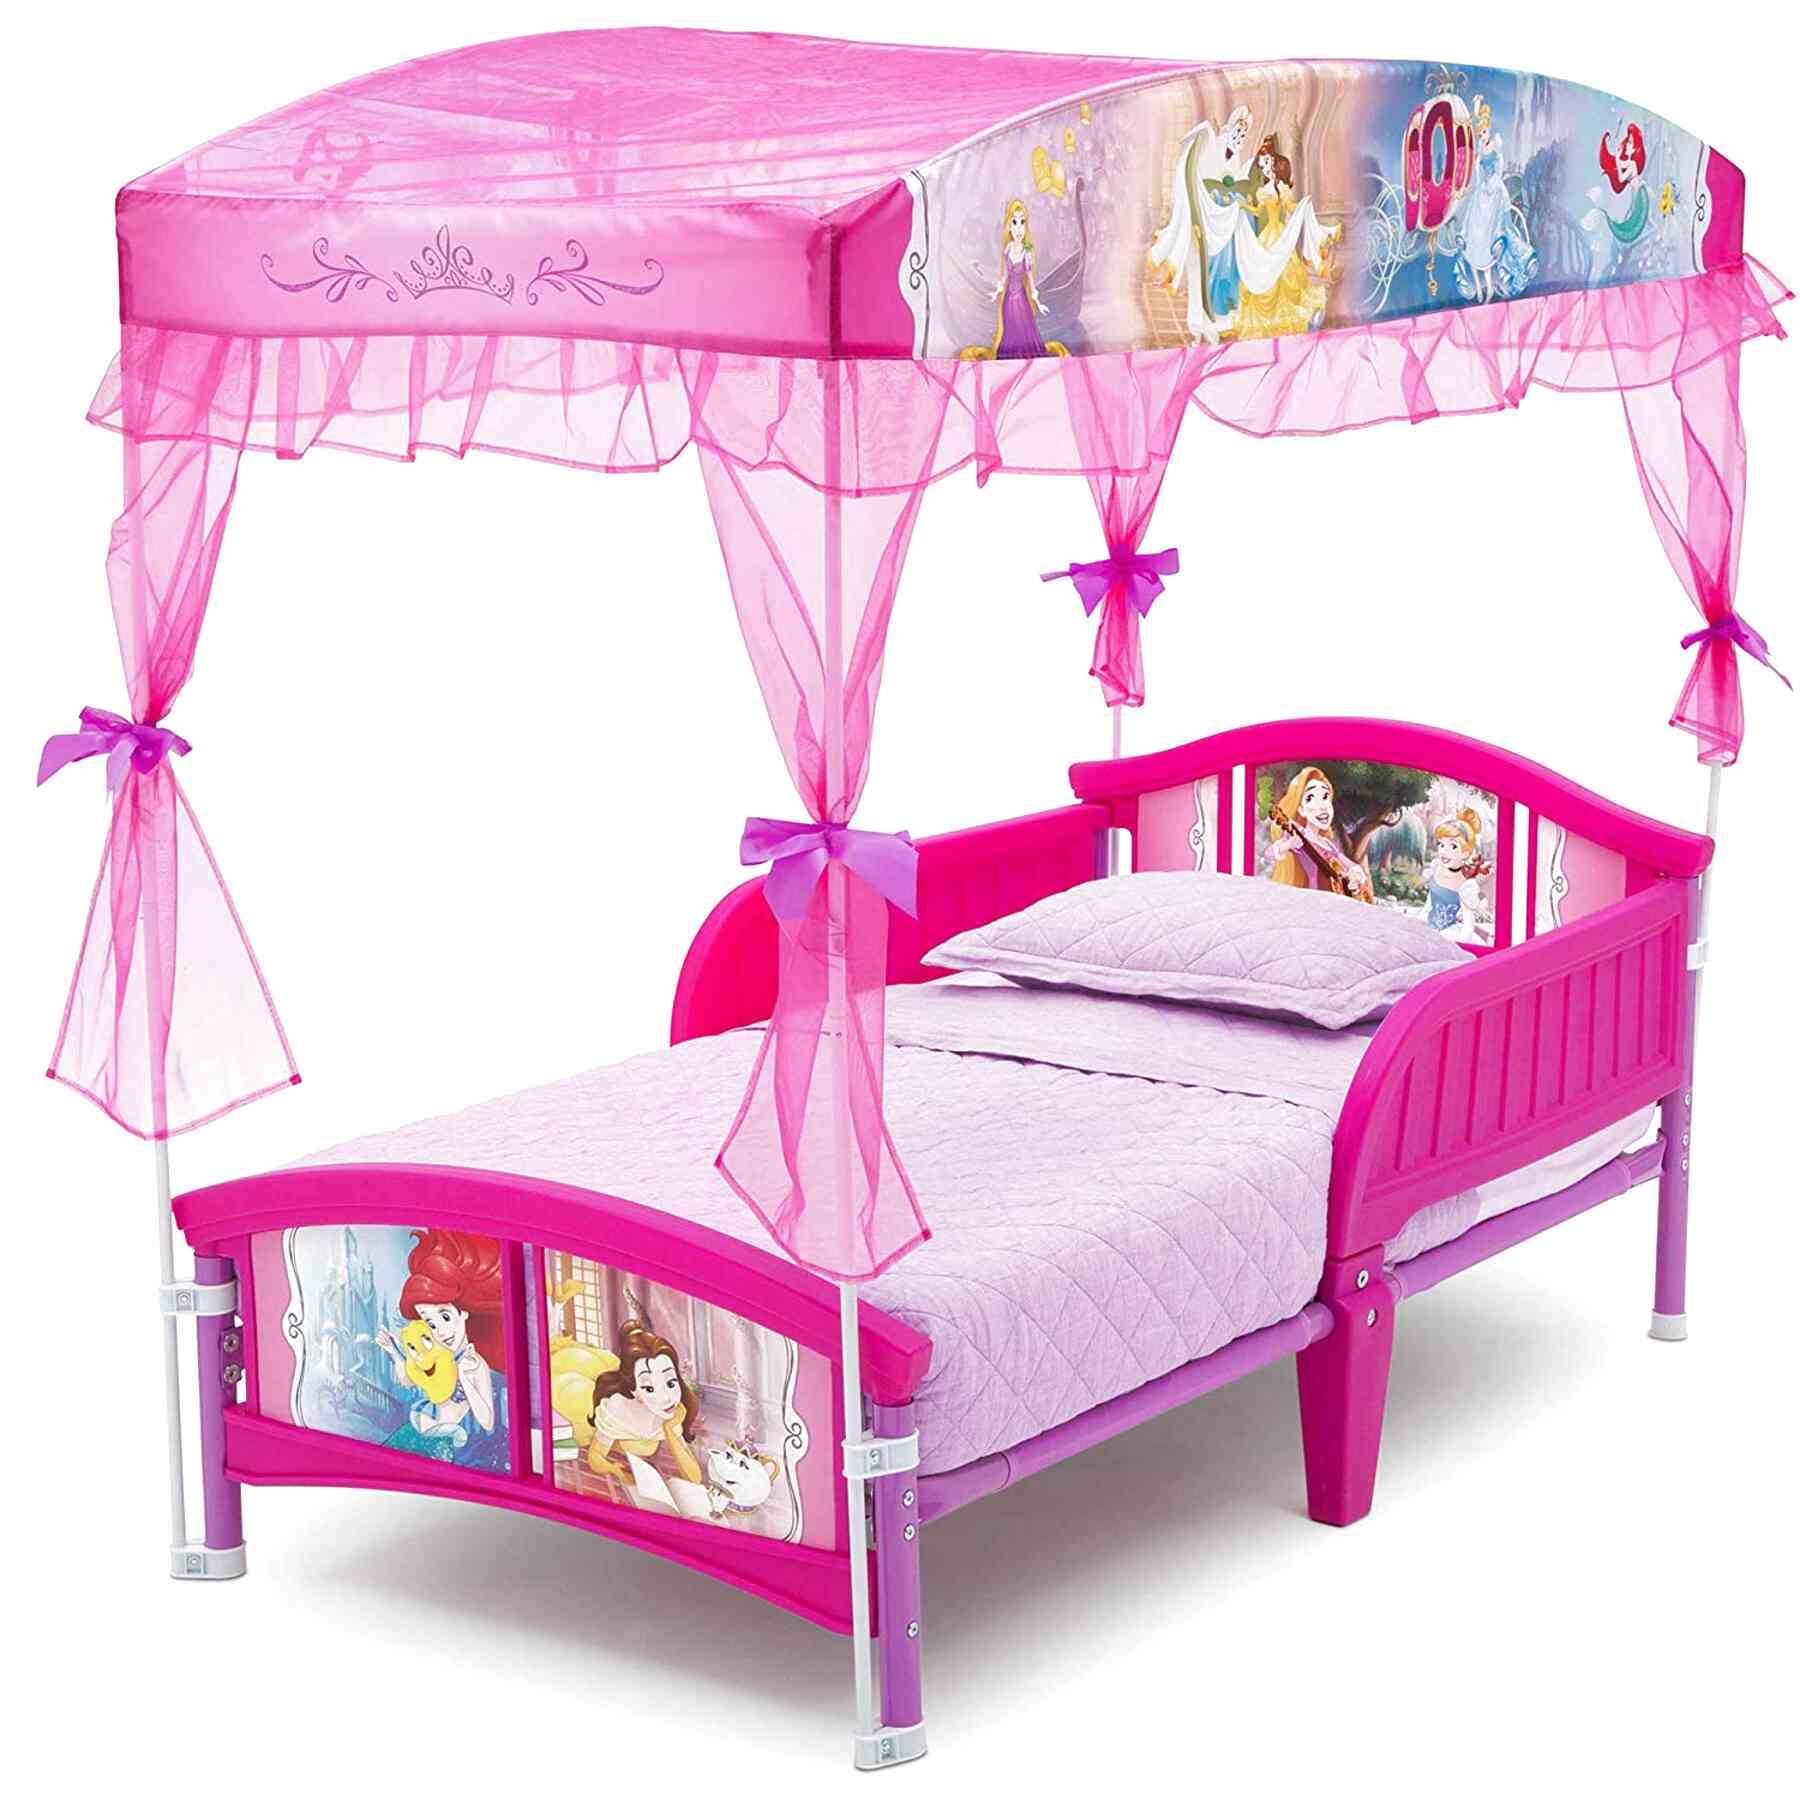 Disney Princess Bed Canopy For Sale In UK View 45 Ads